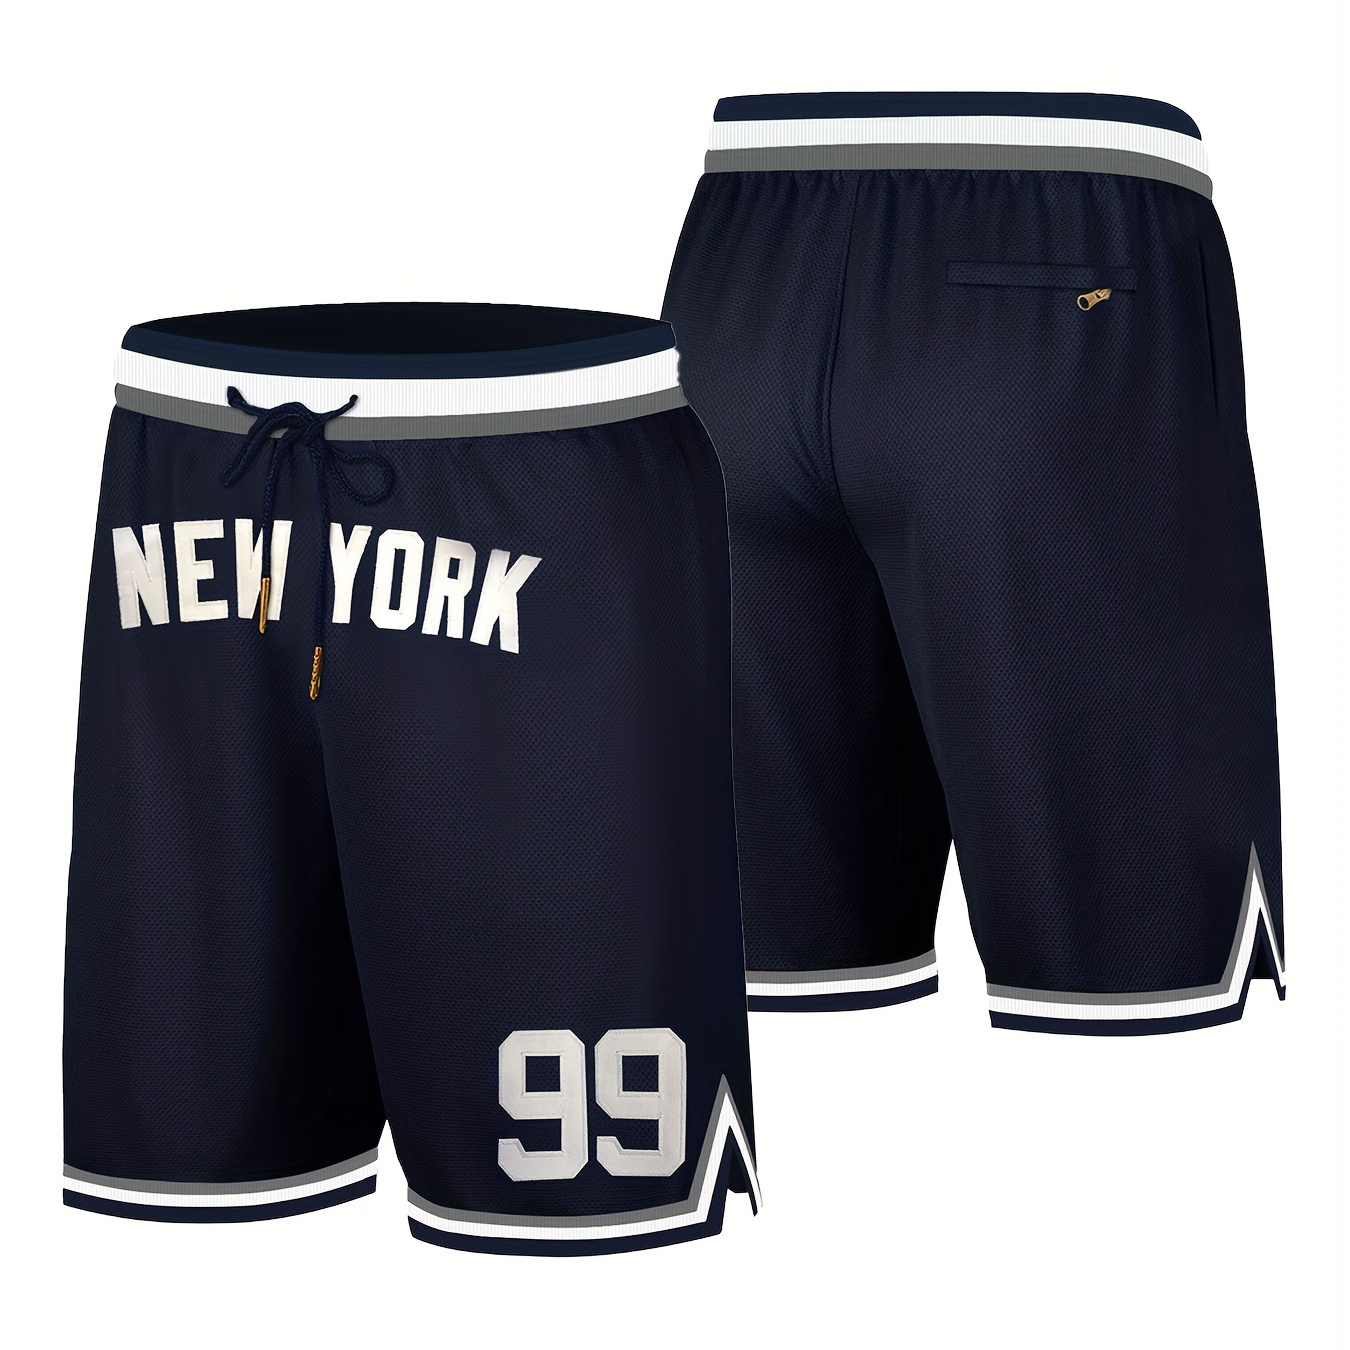 

New York 99 Embroidery Men's Casual Active Loose Shorts, Striped Drawstring Shorts For Summer Basketball Training And Competition